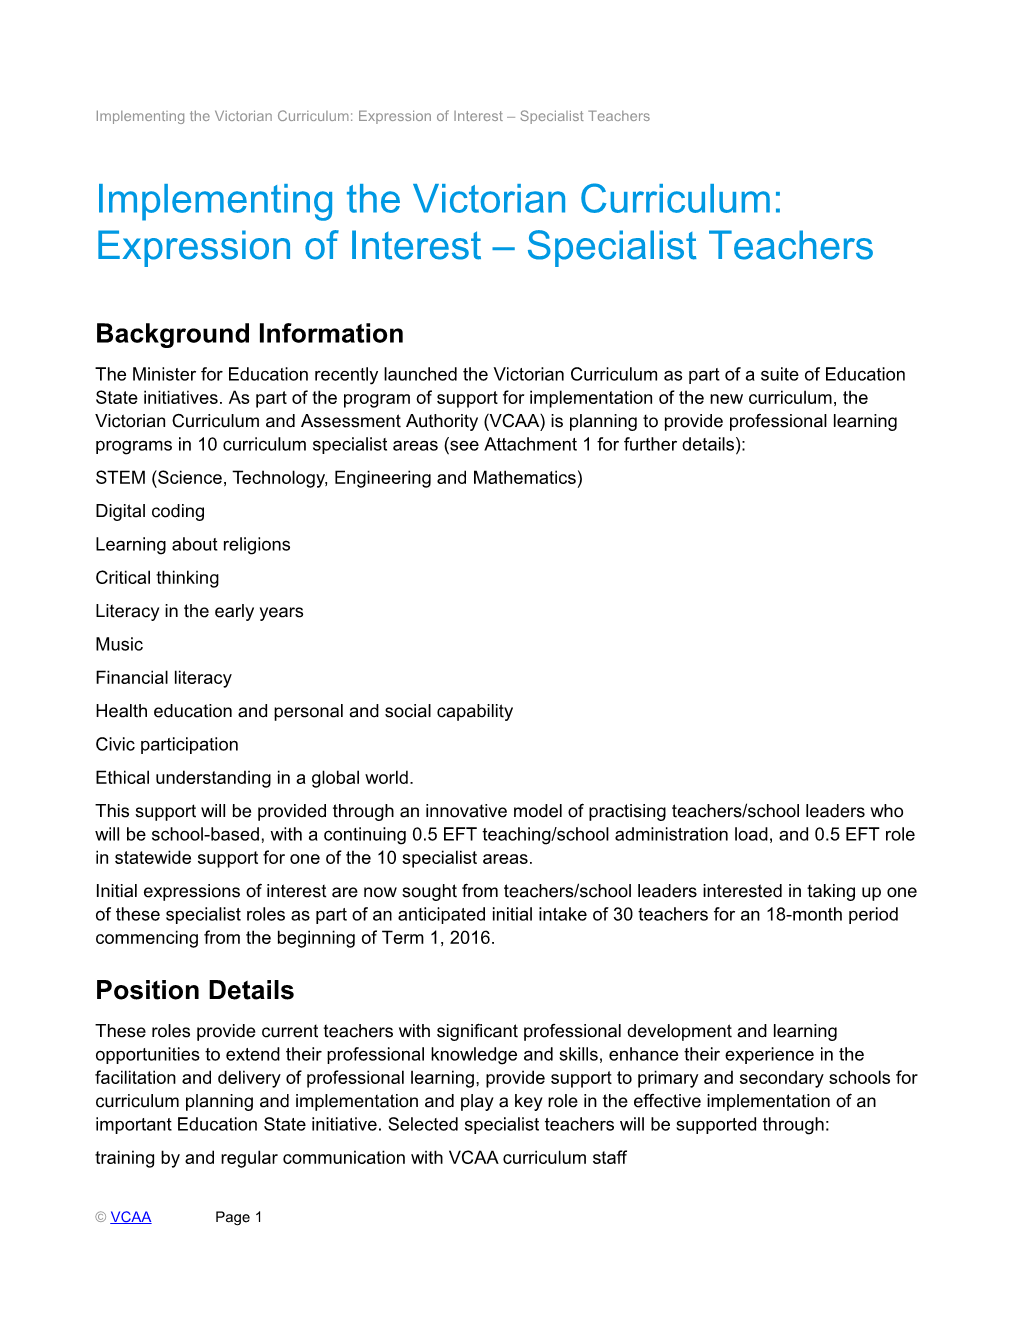 Implementing the Victorian Curriculum: Expression of Interest Specialist Teachers